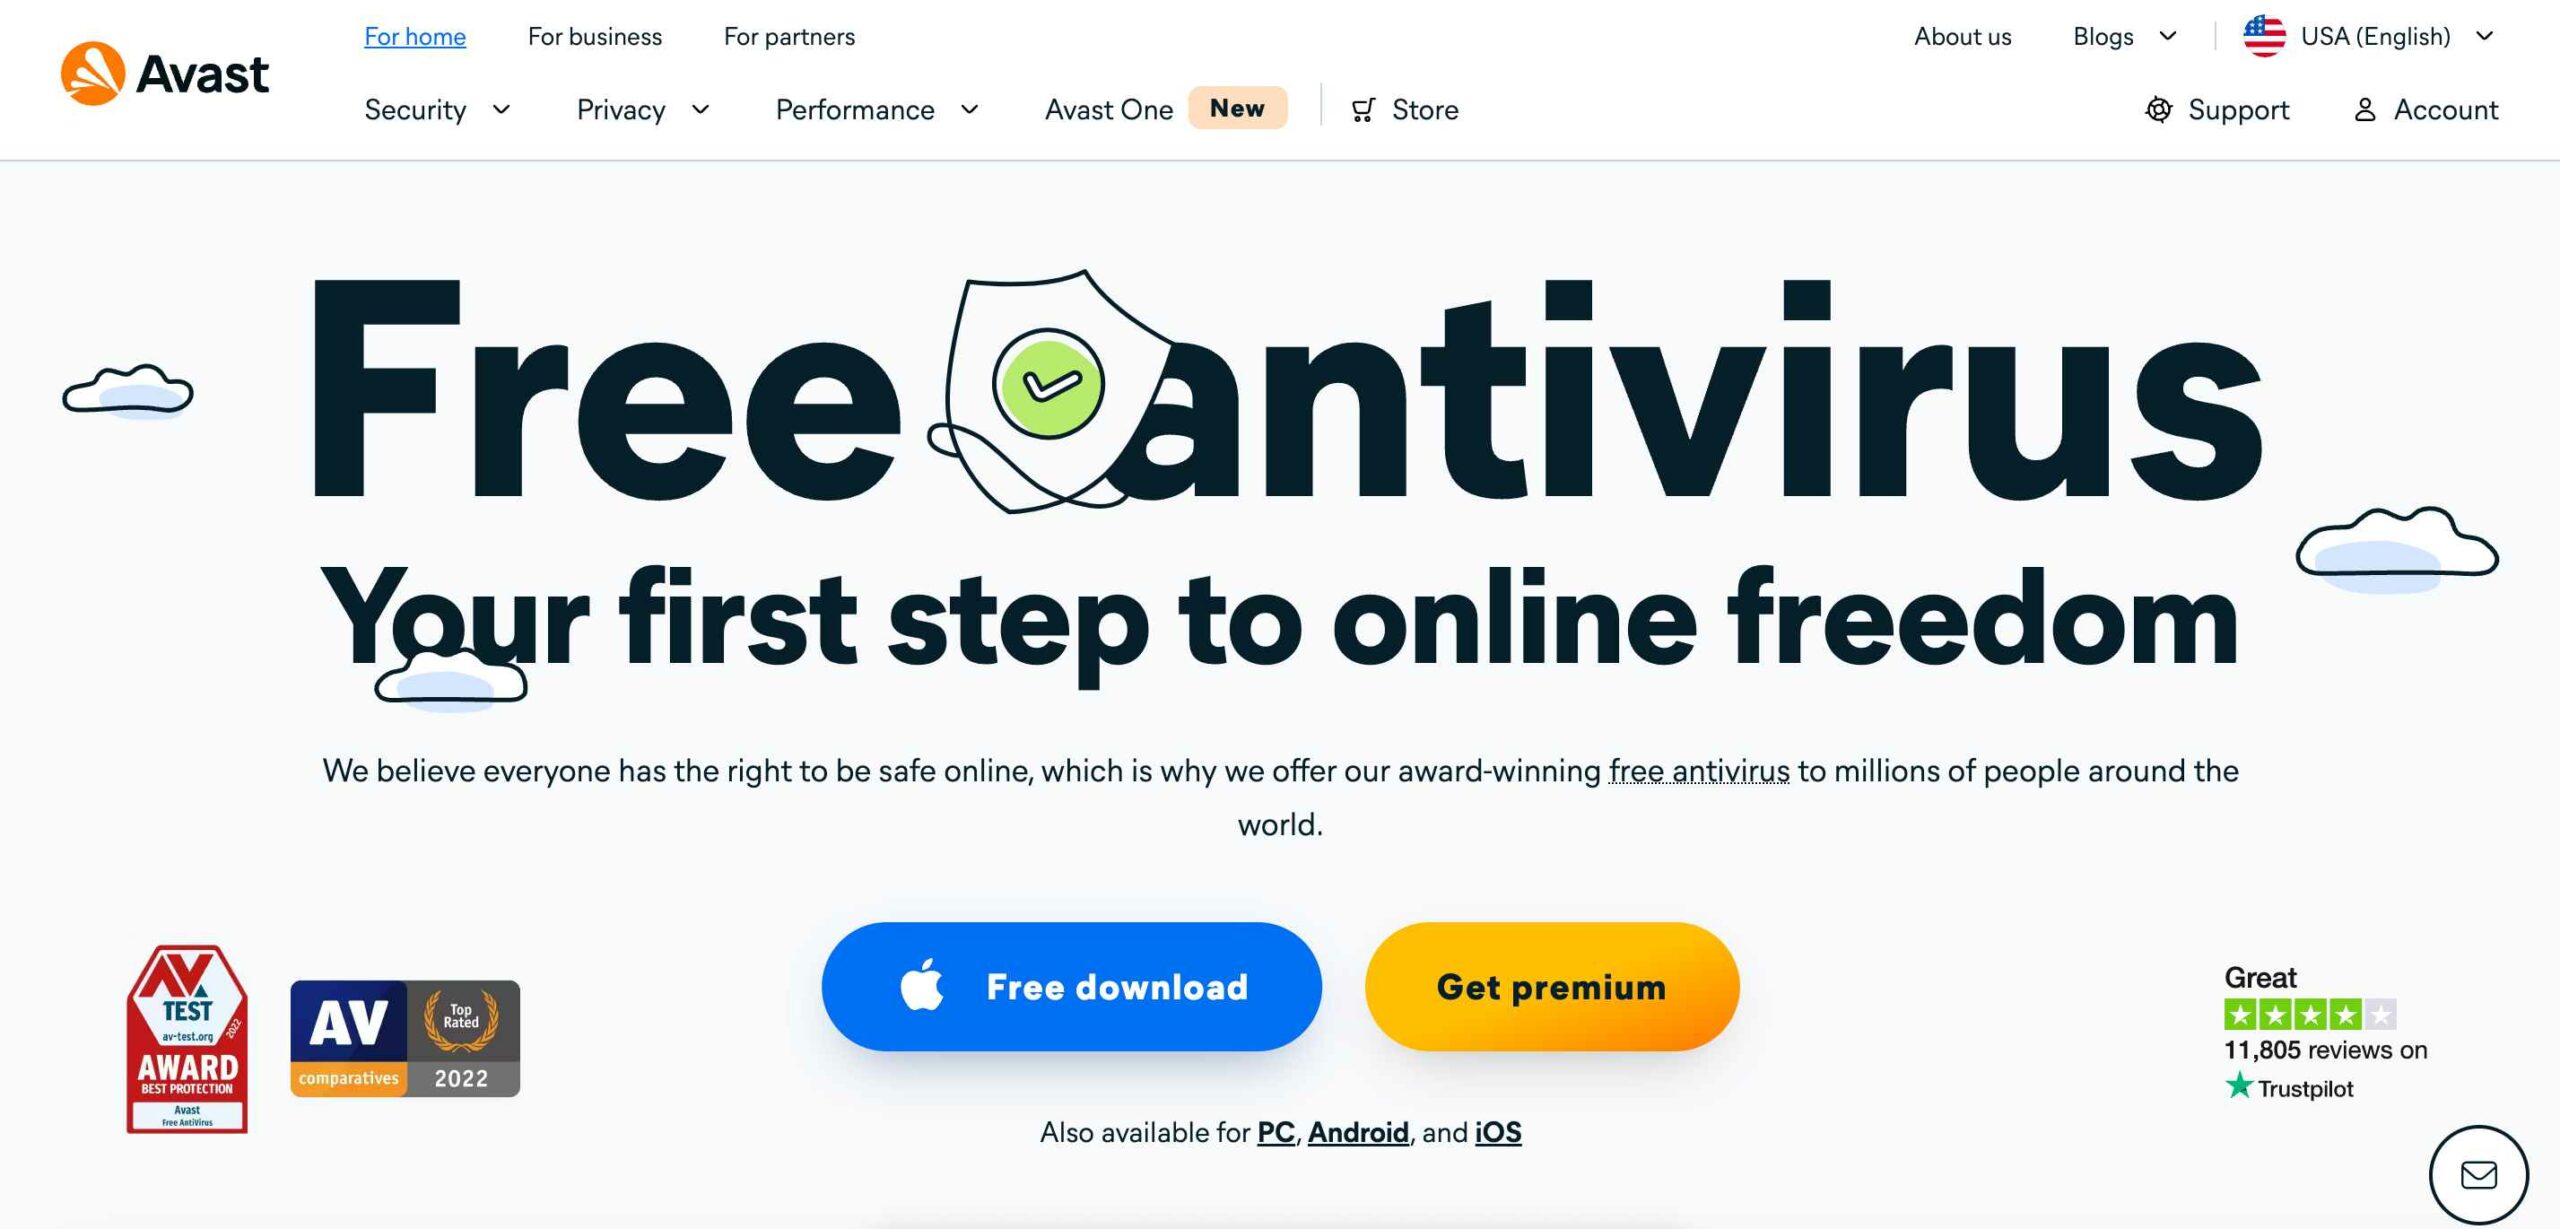 Overview Of Avast